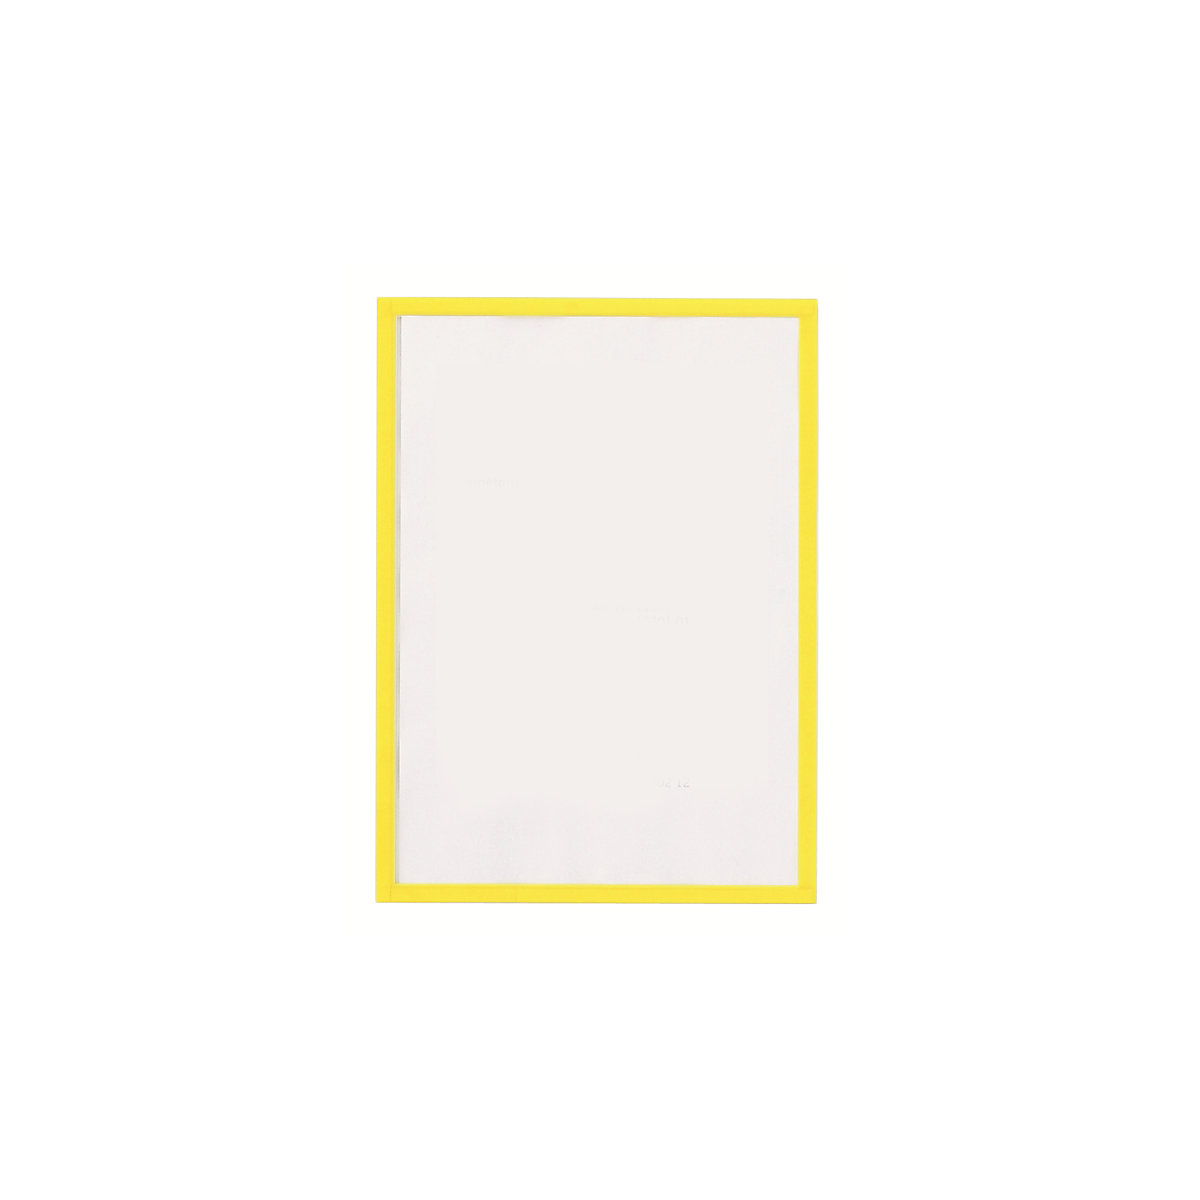 magnetofix vision panel – magnetoplan, format A3, pack of 5, yellow frame-5